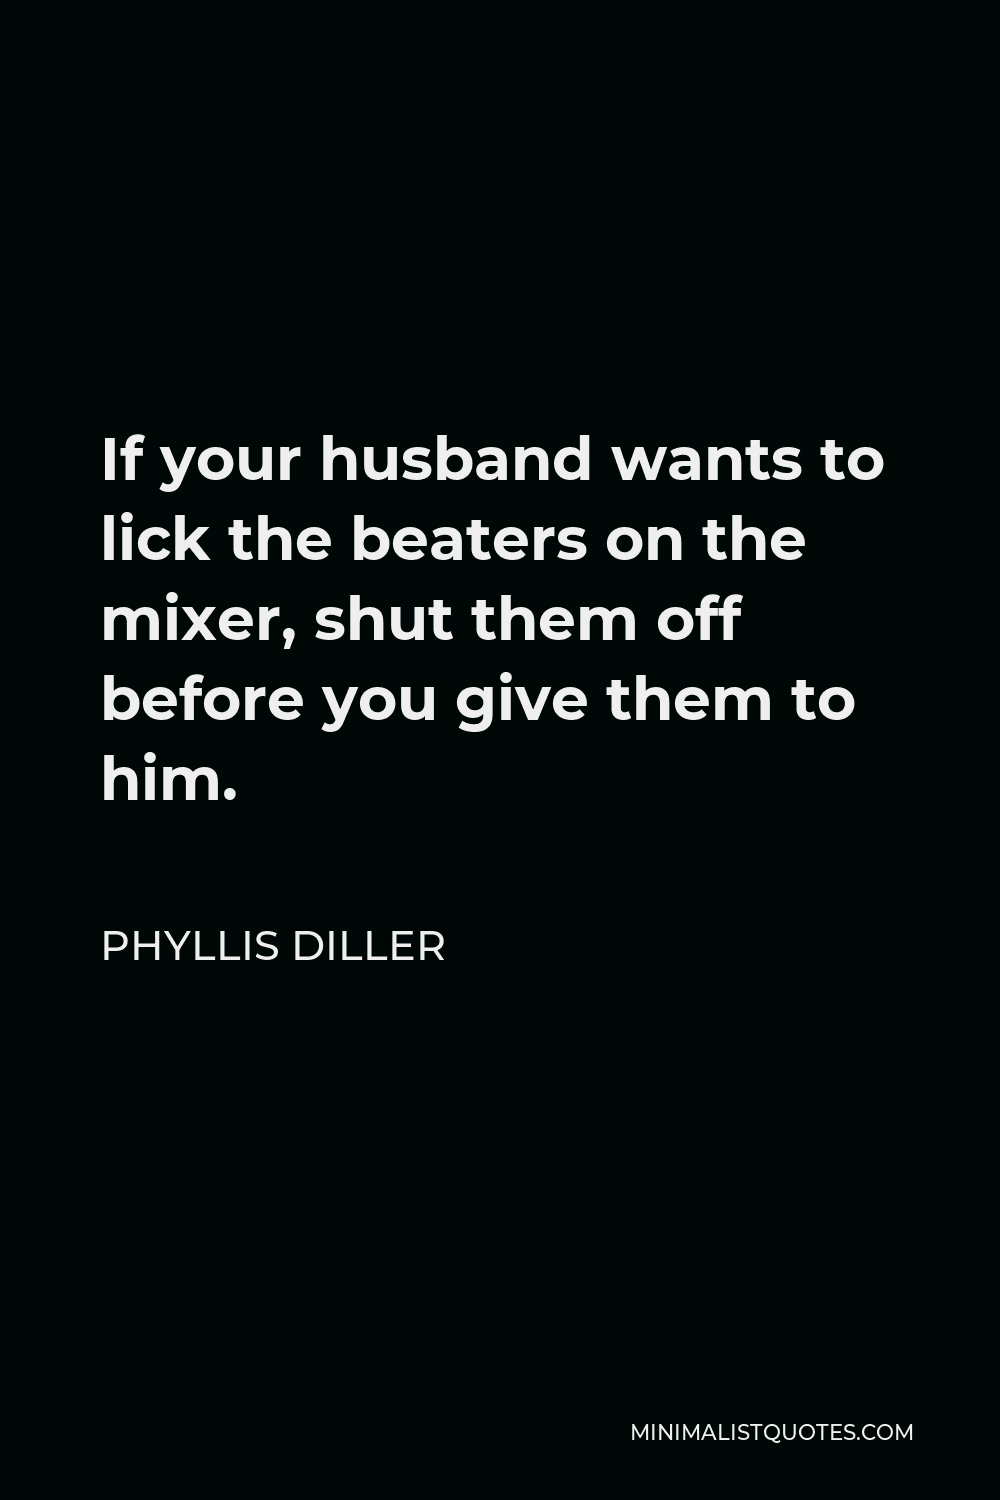 Phyllis Diller Quote - If your husband wants to lick the beaters on the mixer, shut them off before you give them to him.